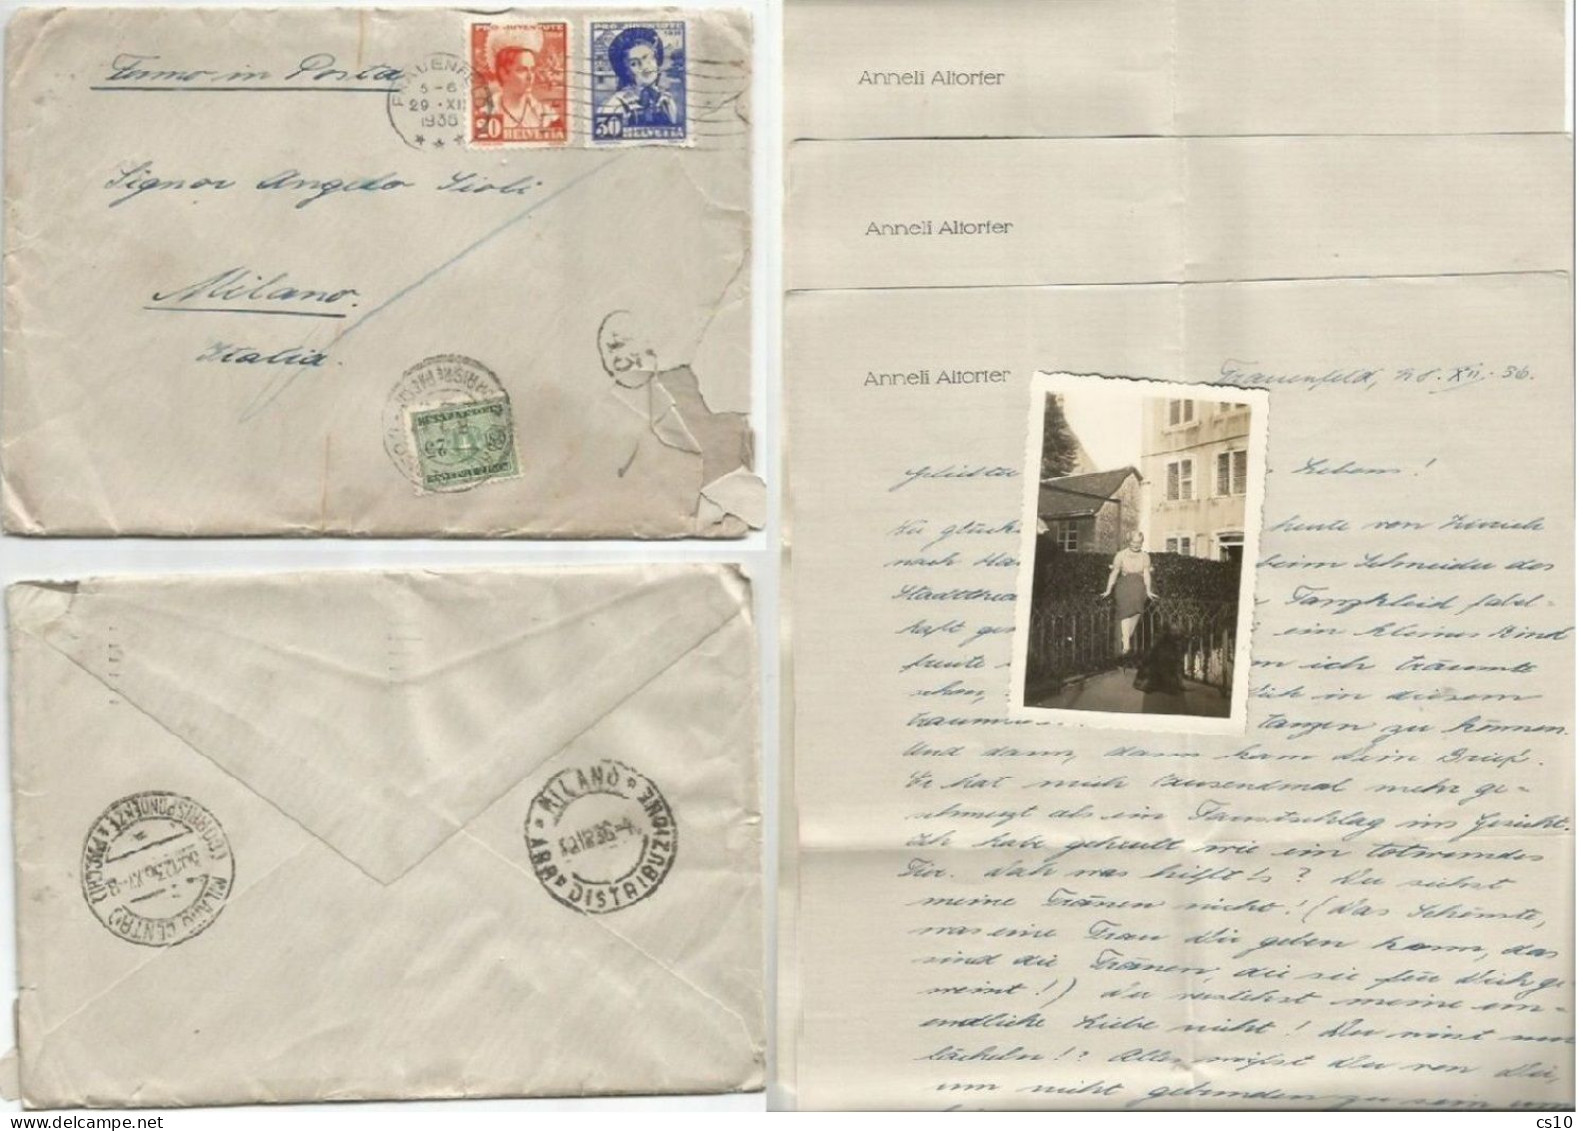 Suisse Frauenfeld 29dec1936 To Italy Fermo Posta Poste Restante With 2v PJ 1936 Taxed P.Due + Photo + 3 Pages Text - Taxe